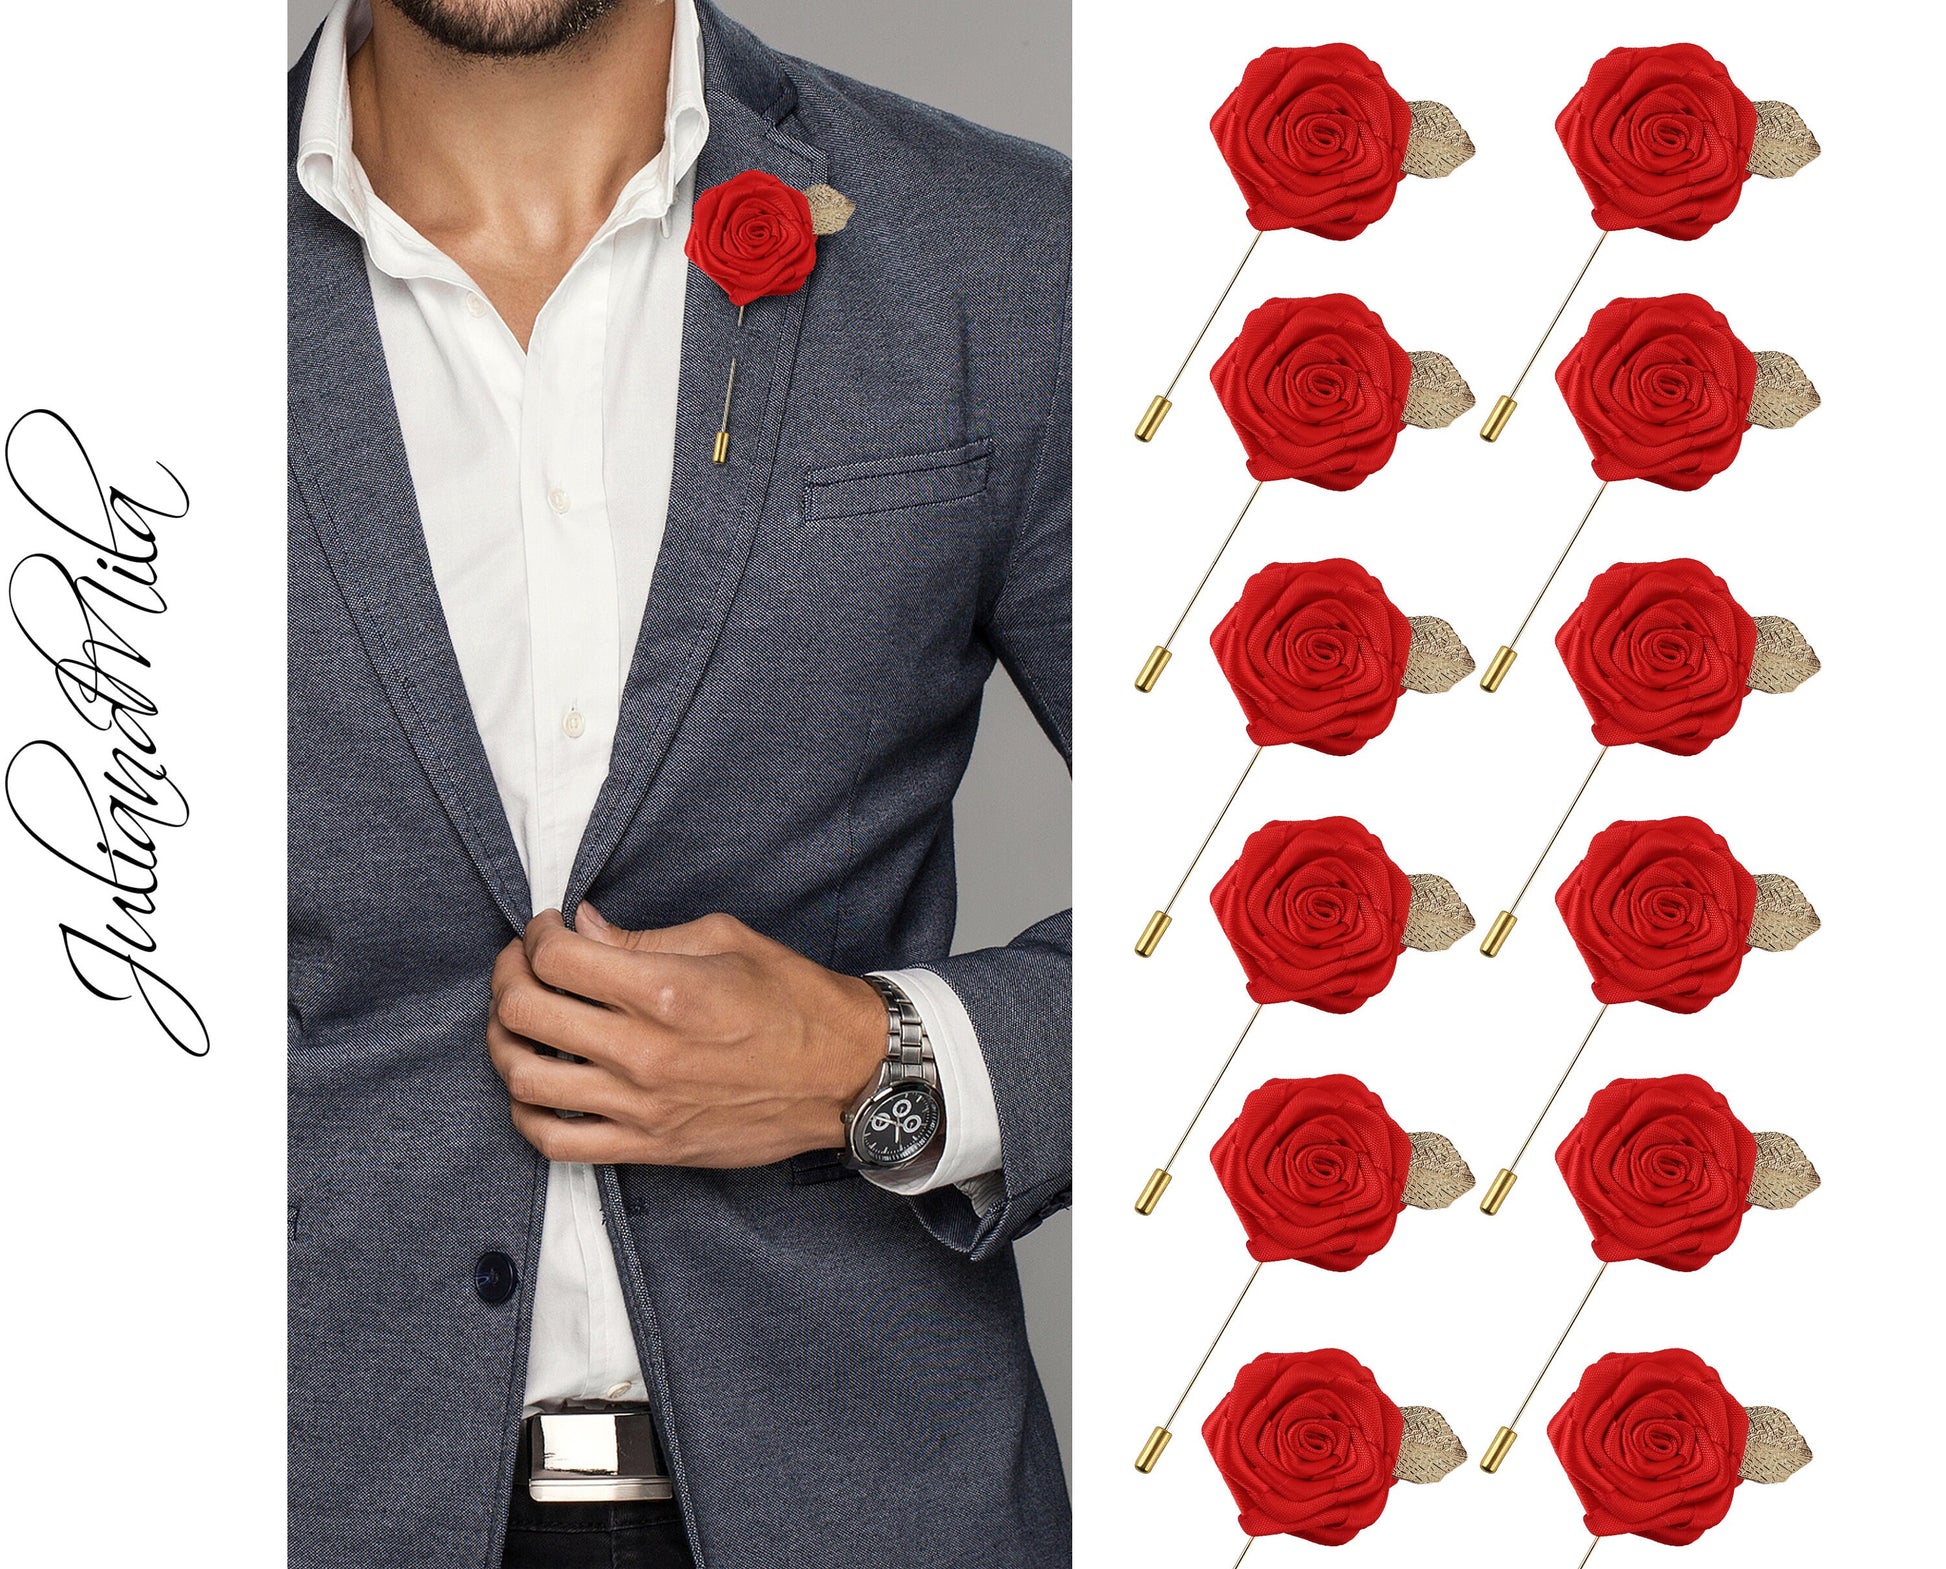 Boutonniere & Lapel Flower Pin Guide